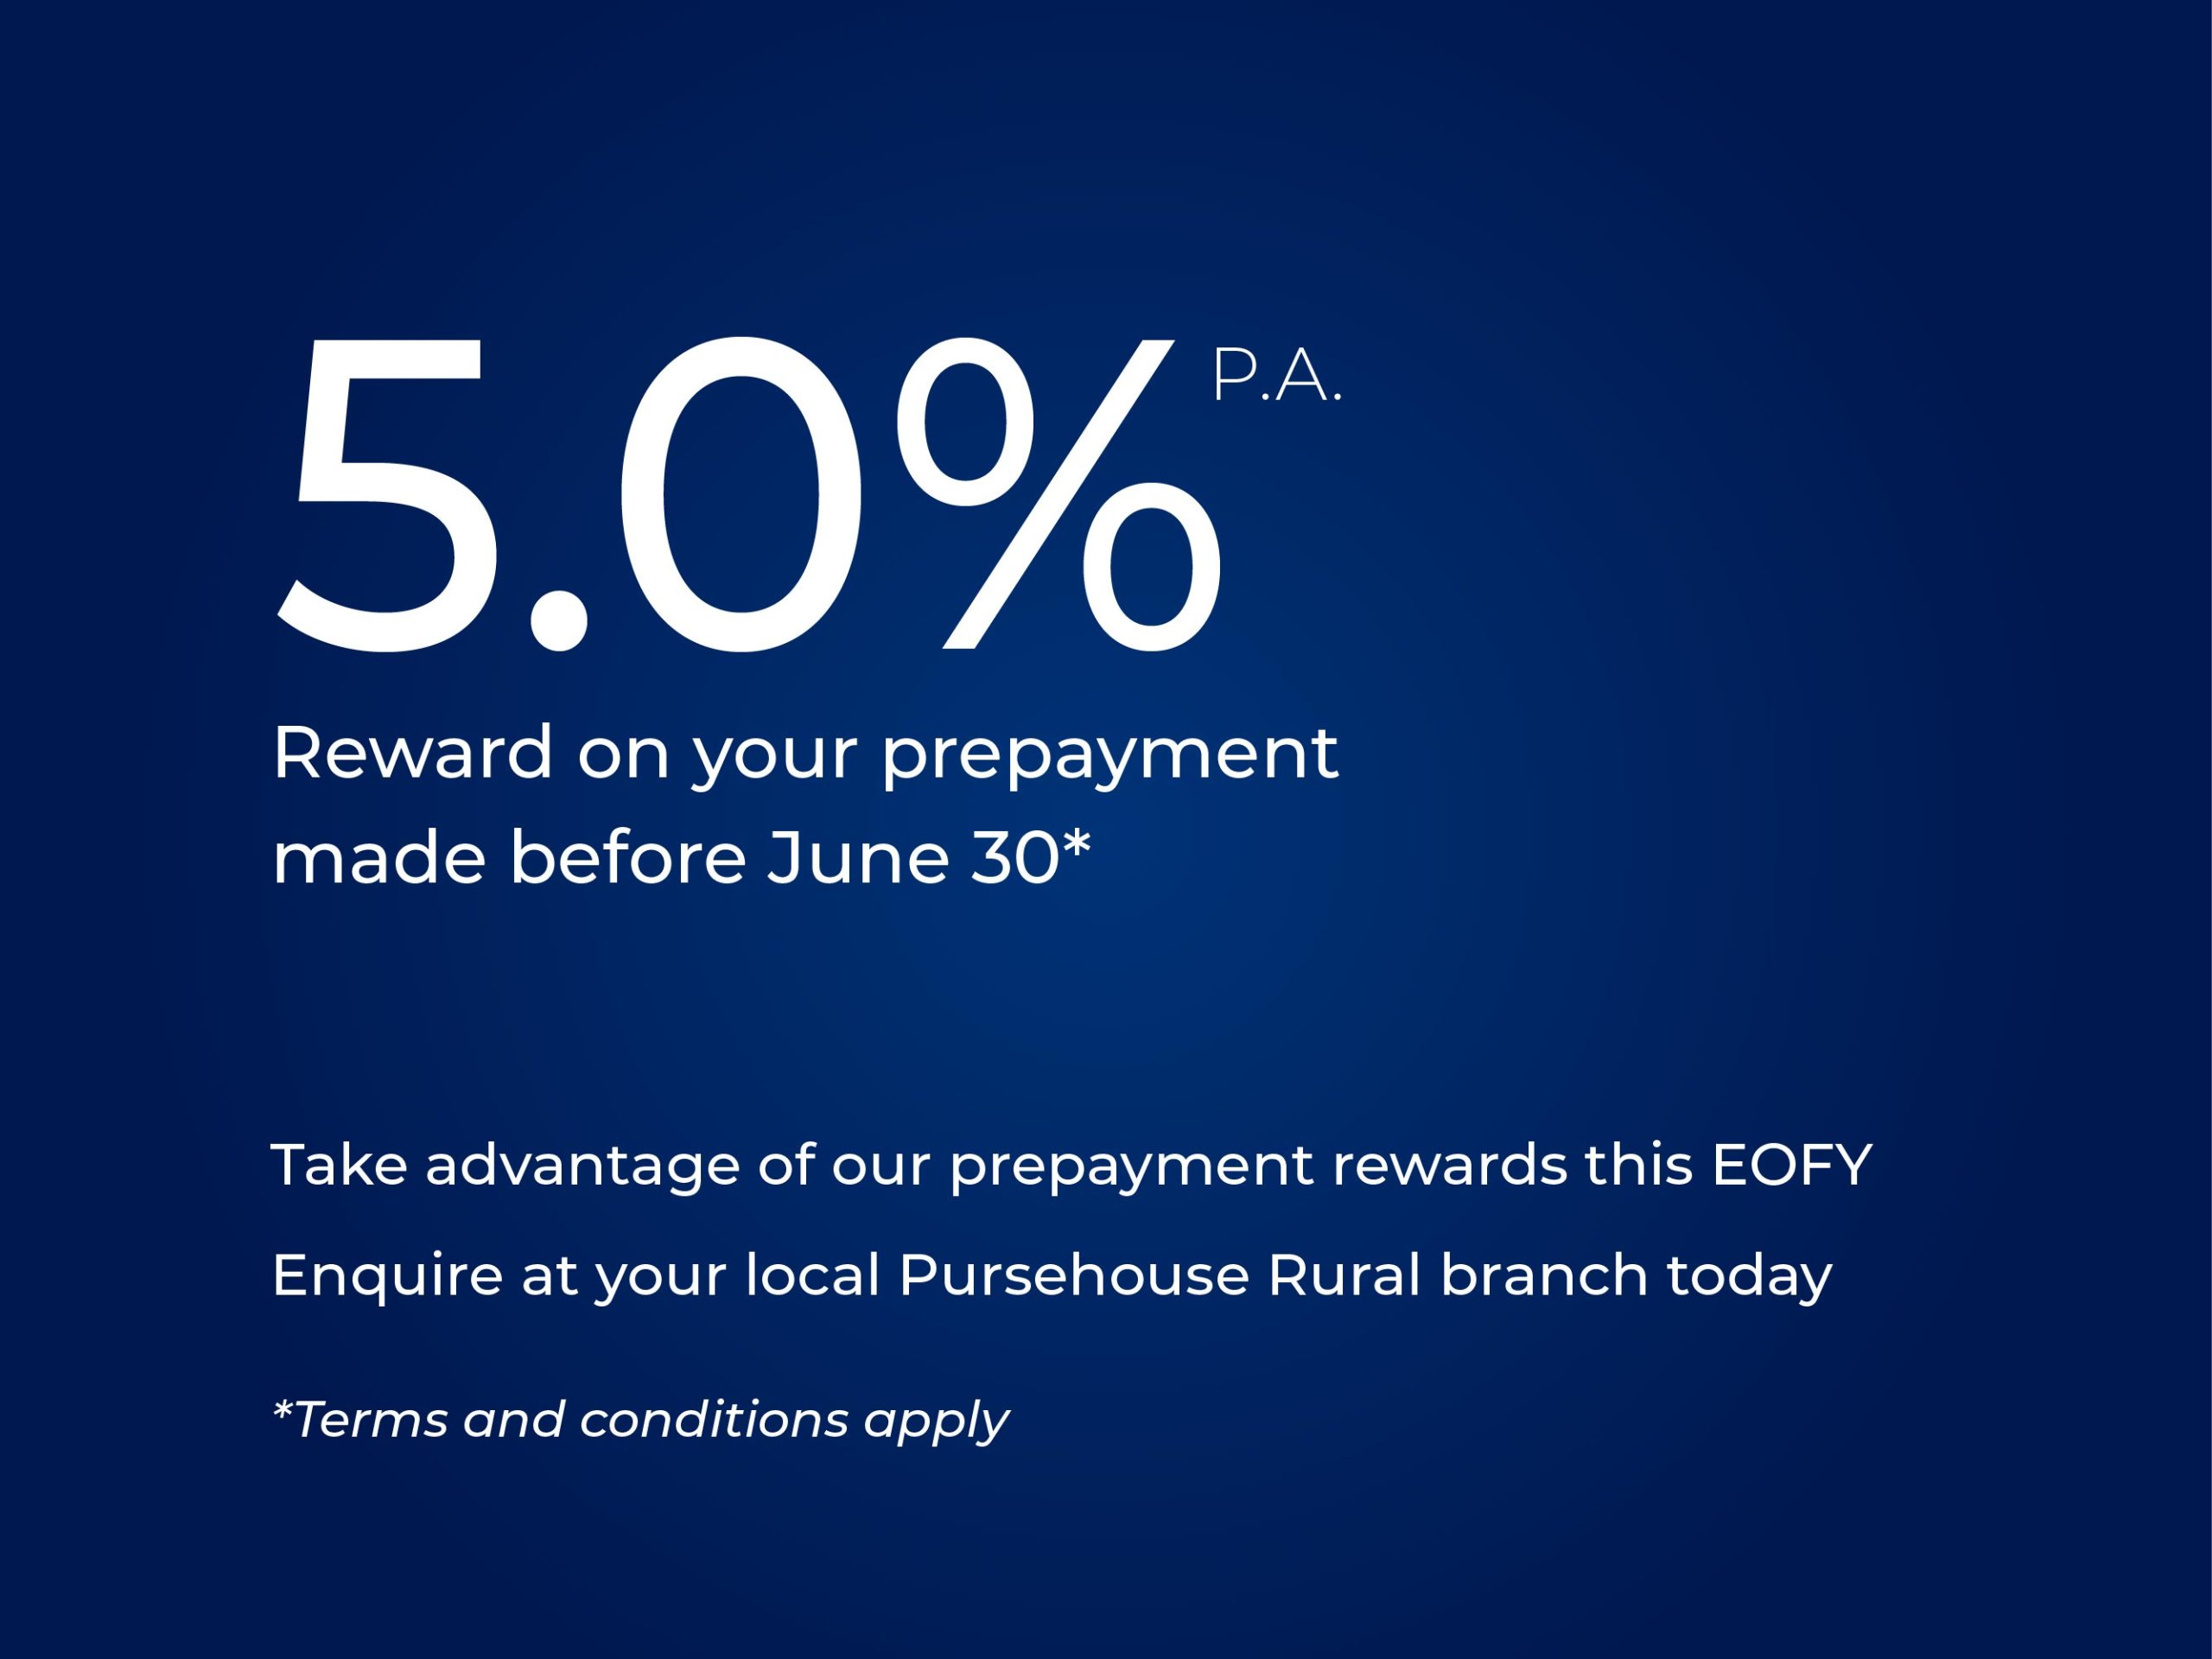 Infographic for Prepayment Rewards from Pursehouse Rural 5.0% p.a. on any prepayment made before June 20